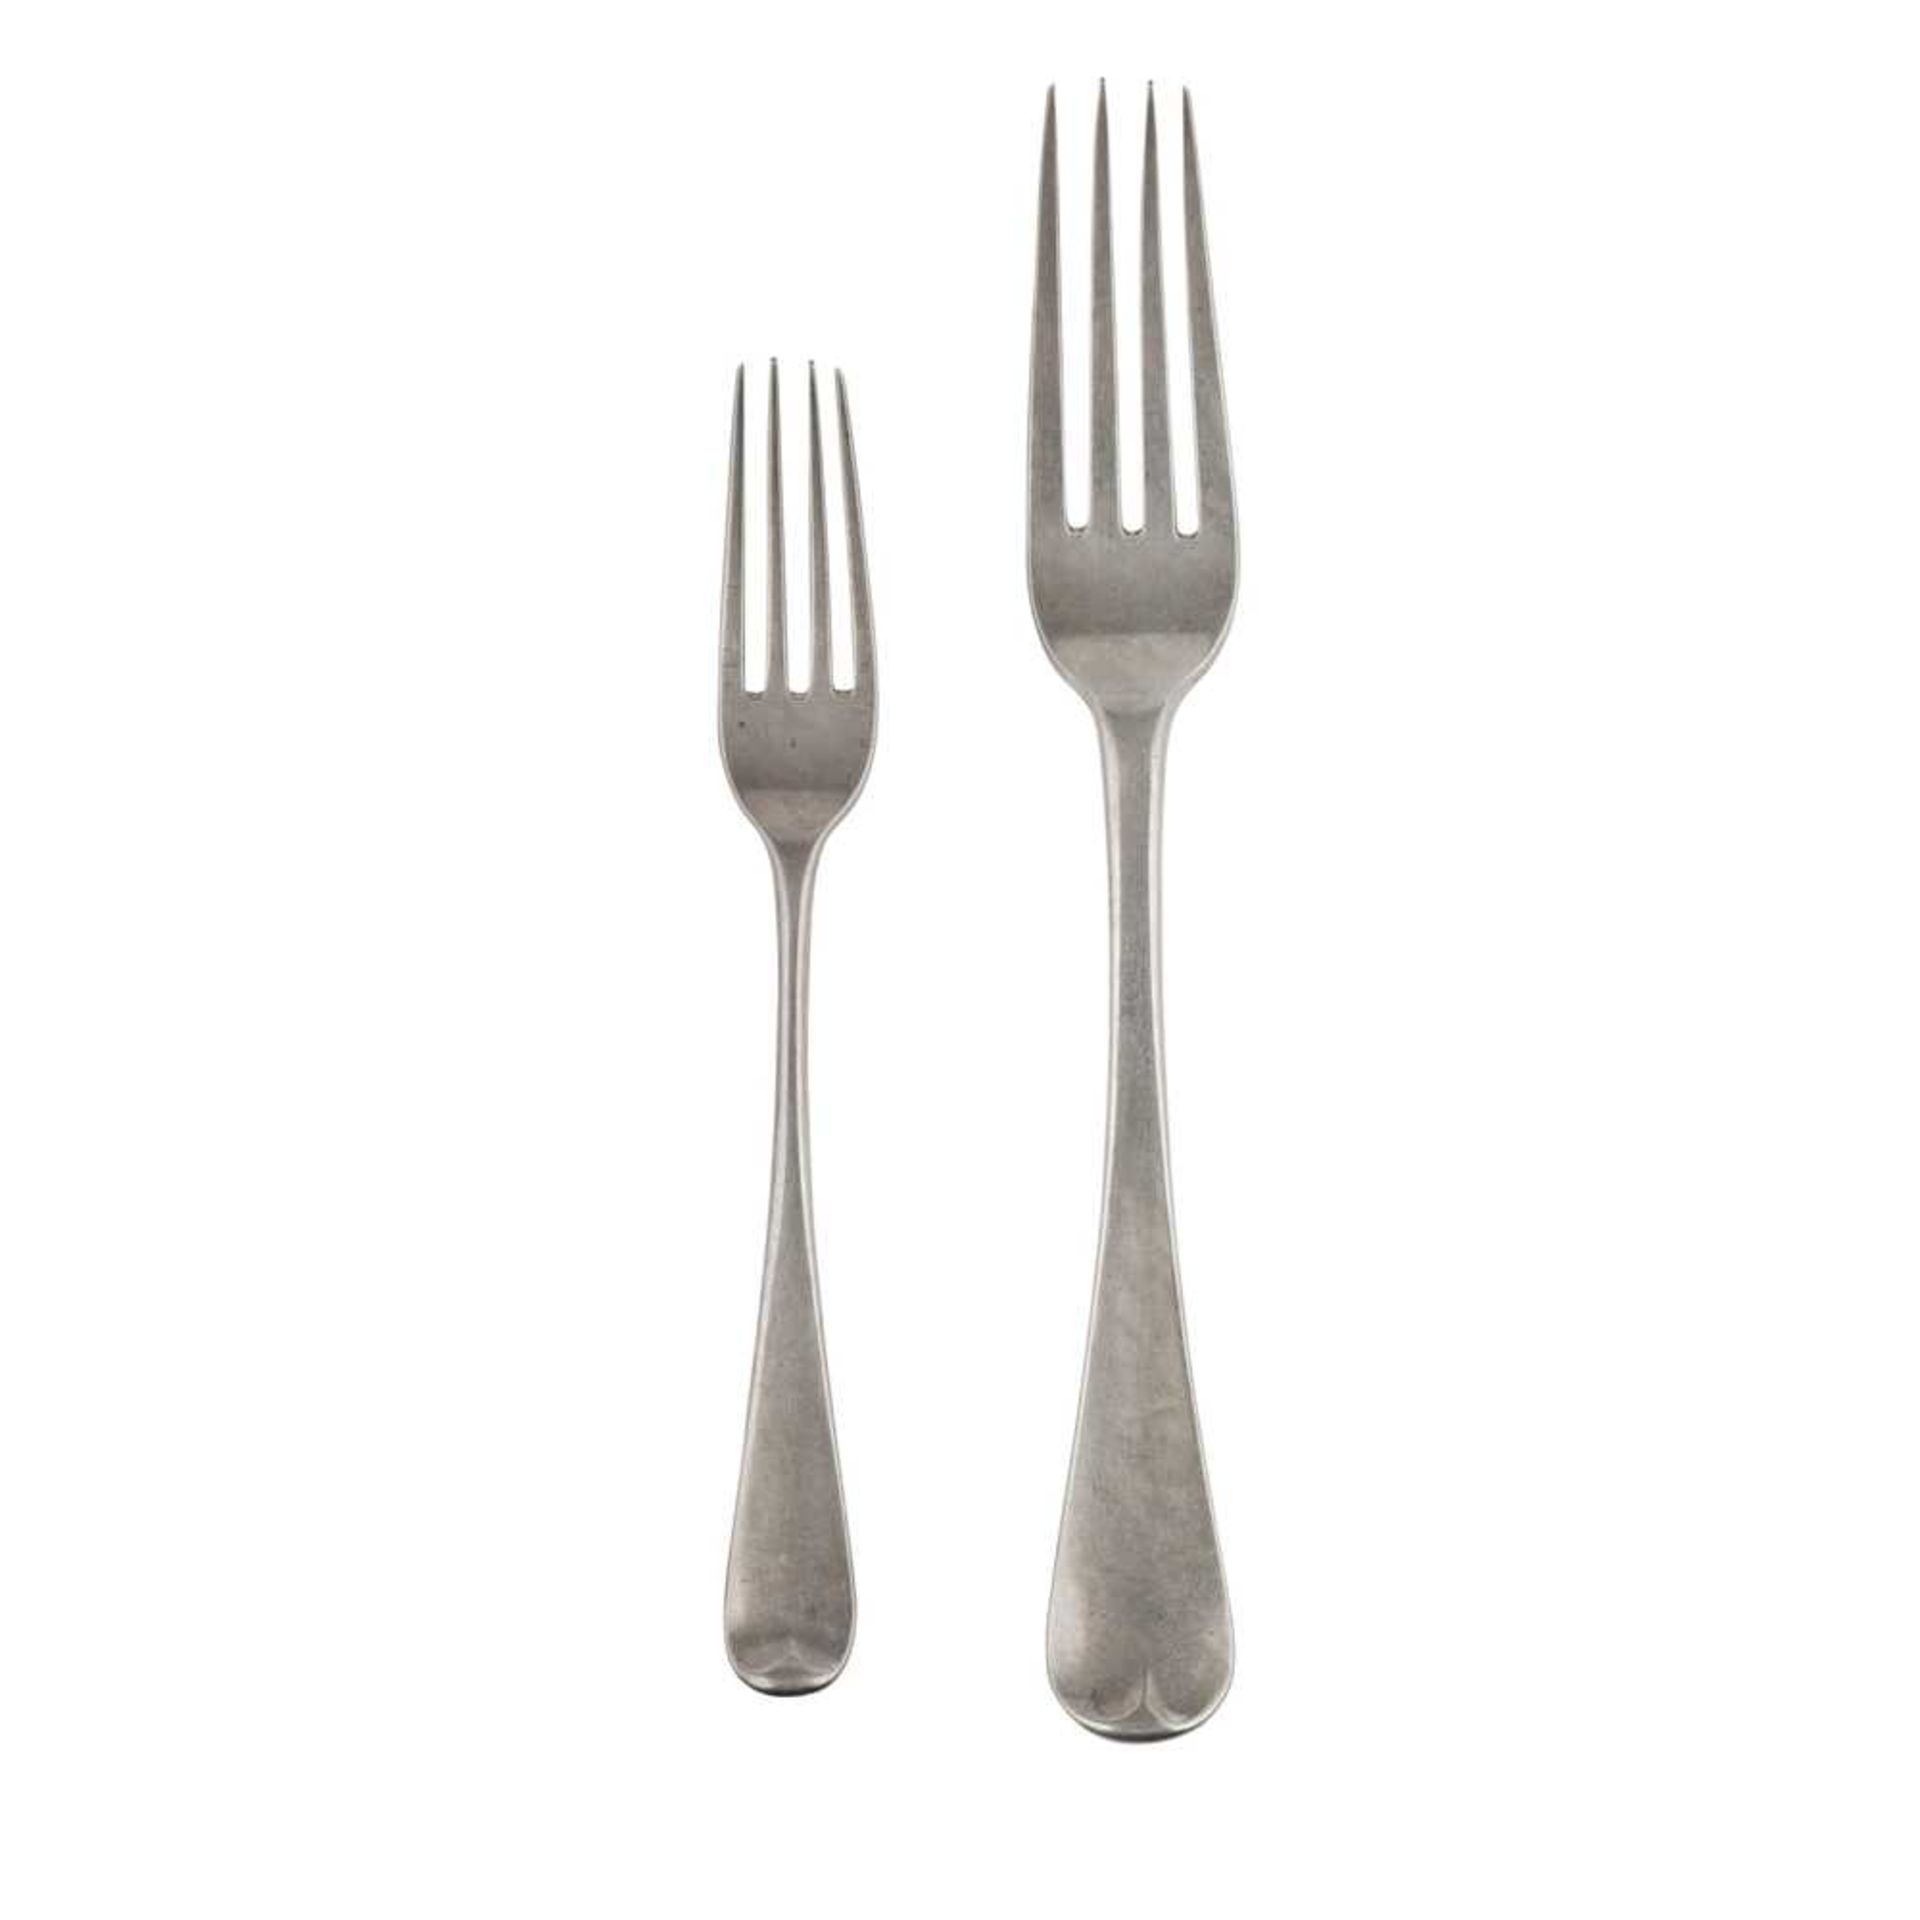 A matched set of fifteen table forks and others